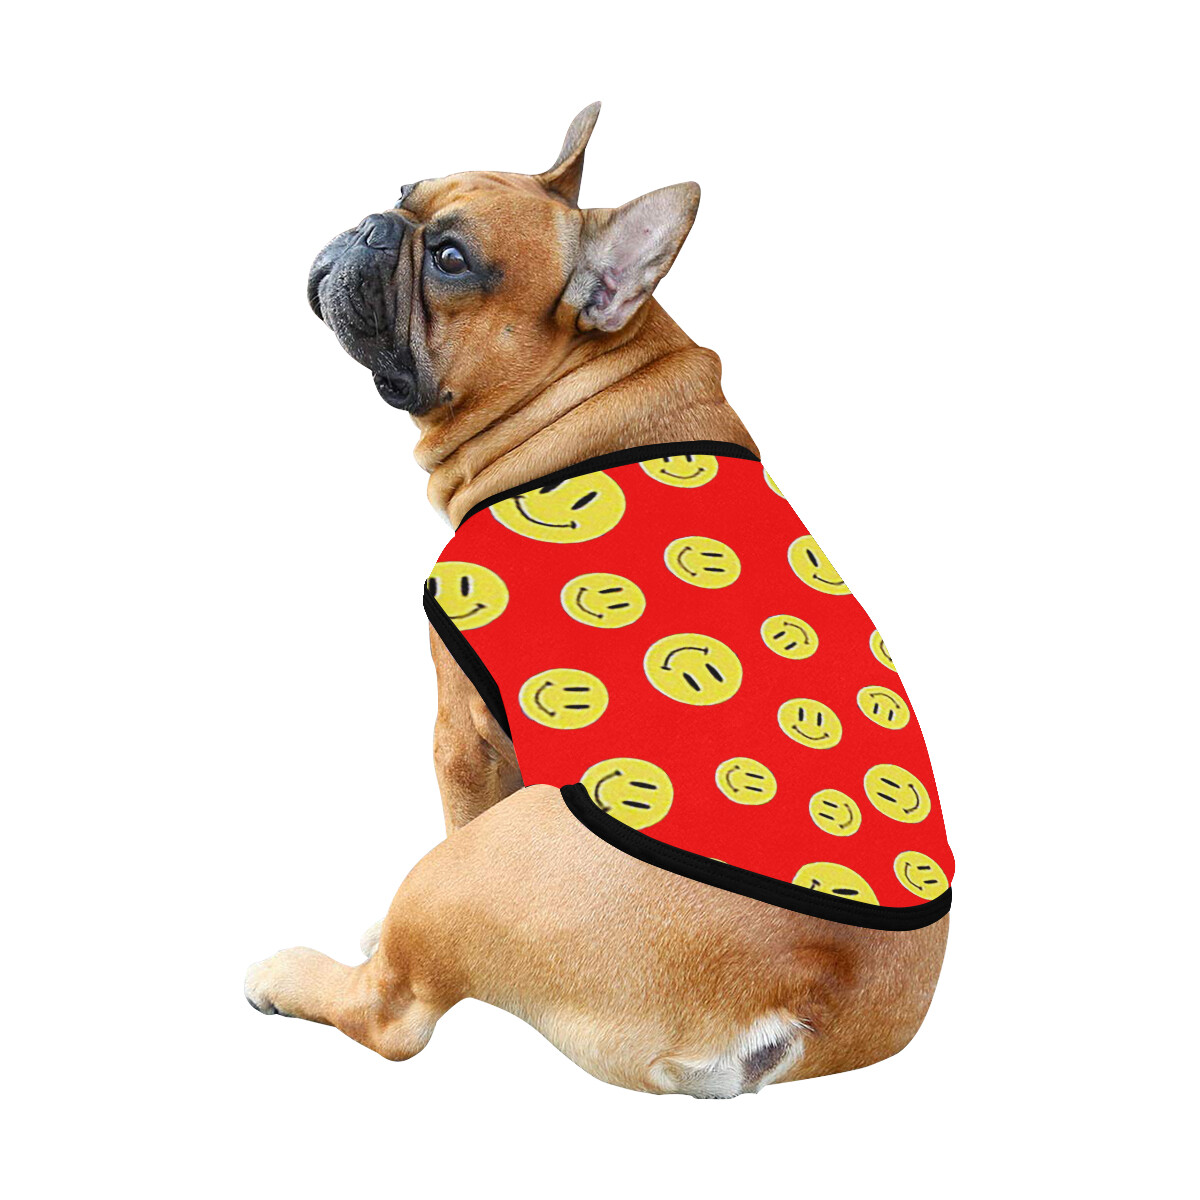 🐕 Happy faces Dog Tank Top, Dog shirt, Dog clothes, Gifts, front back print, 7 sizes XS to 3XL, dog t-shirt, dog t-shirt, dog gift, red